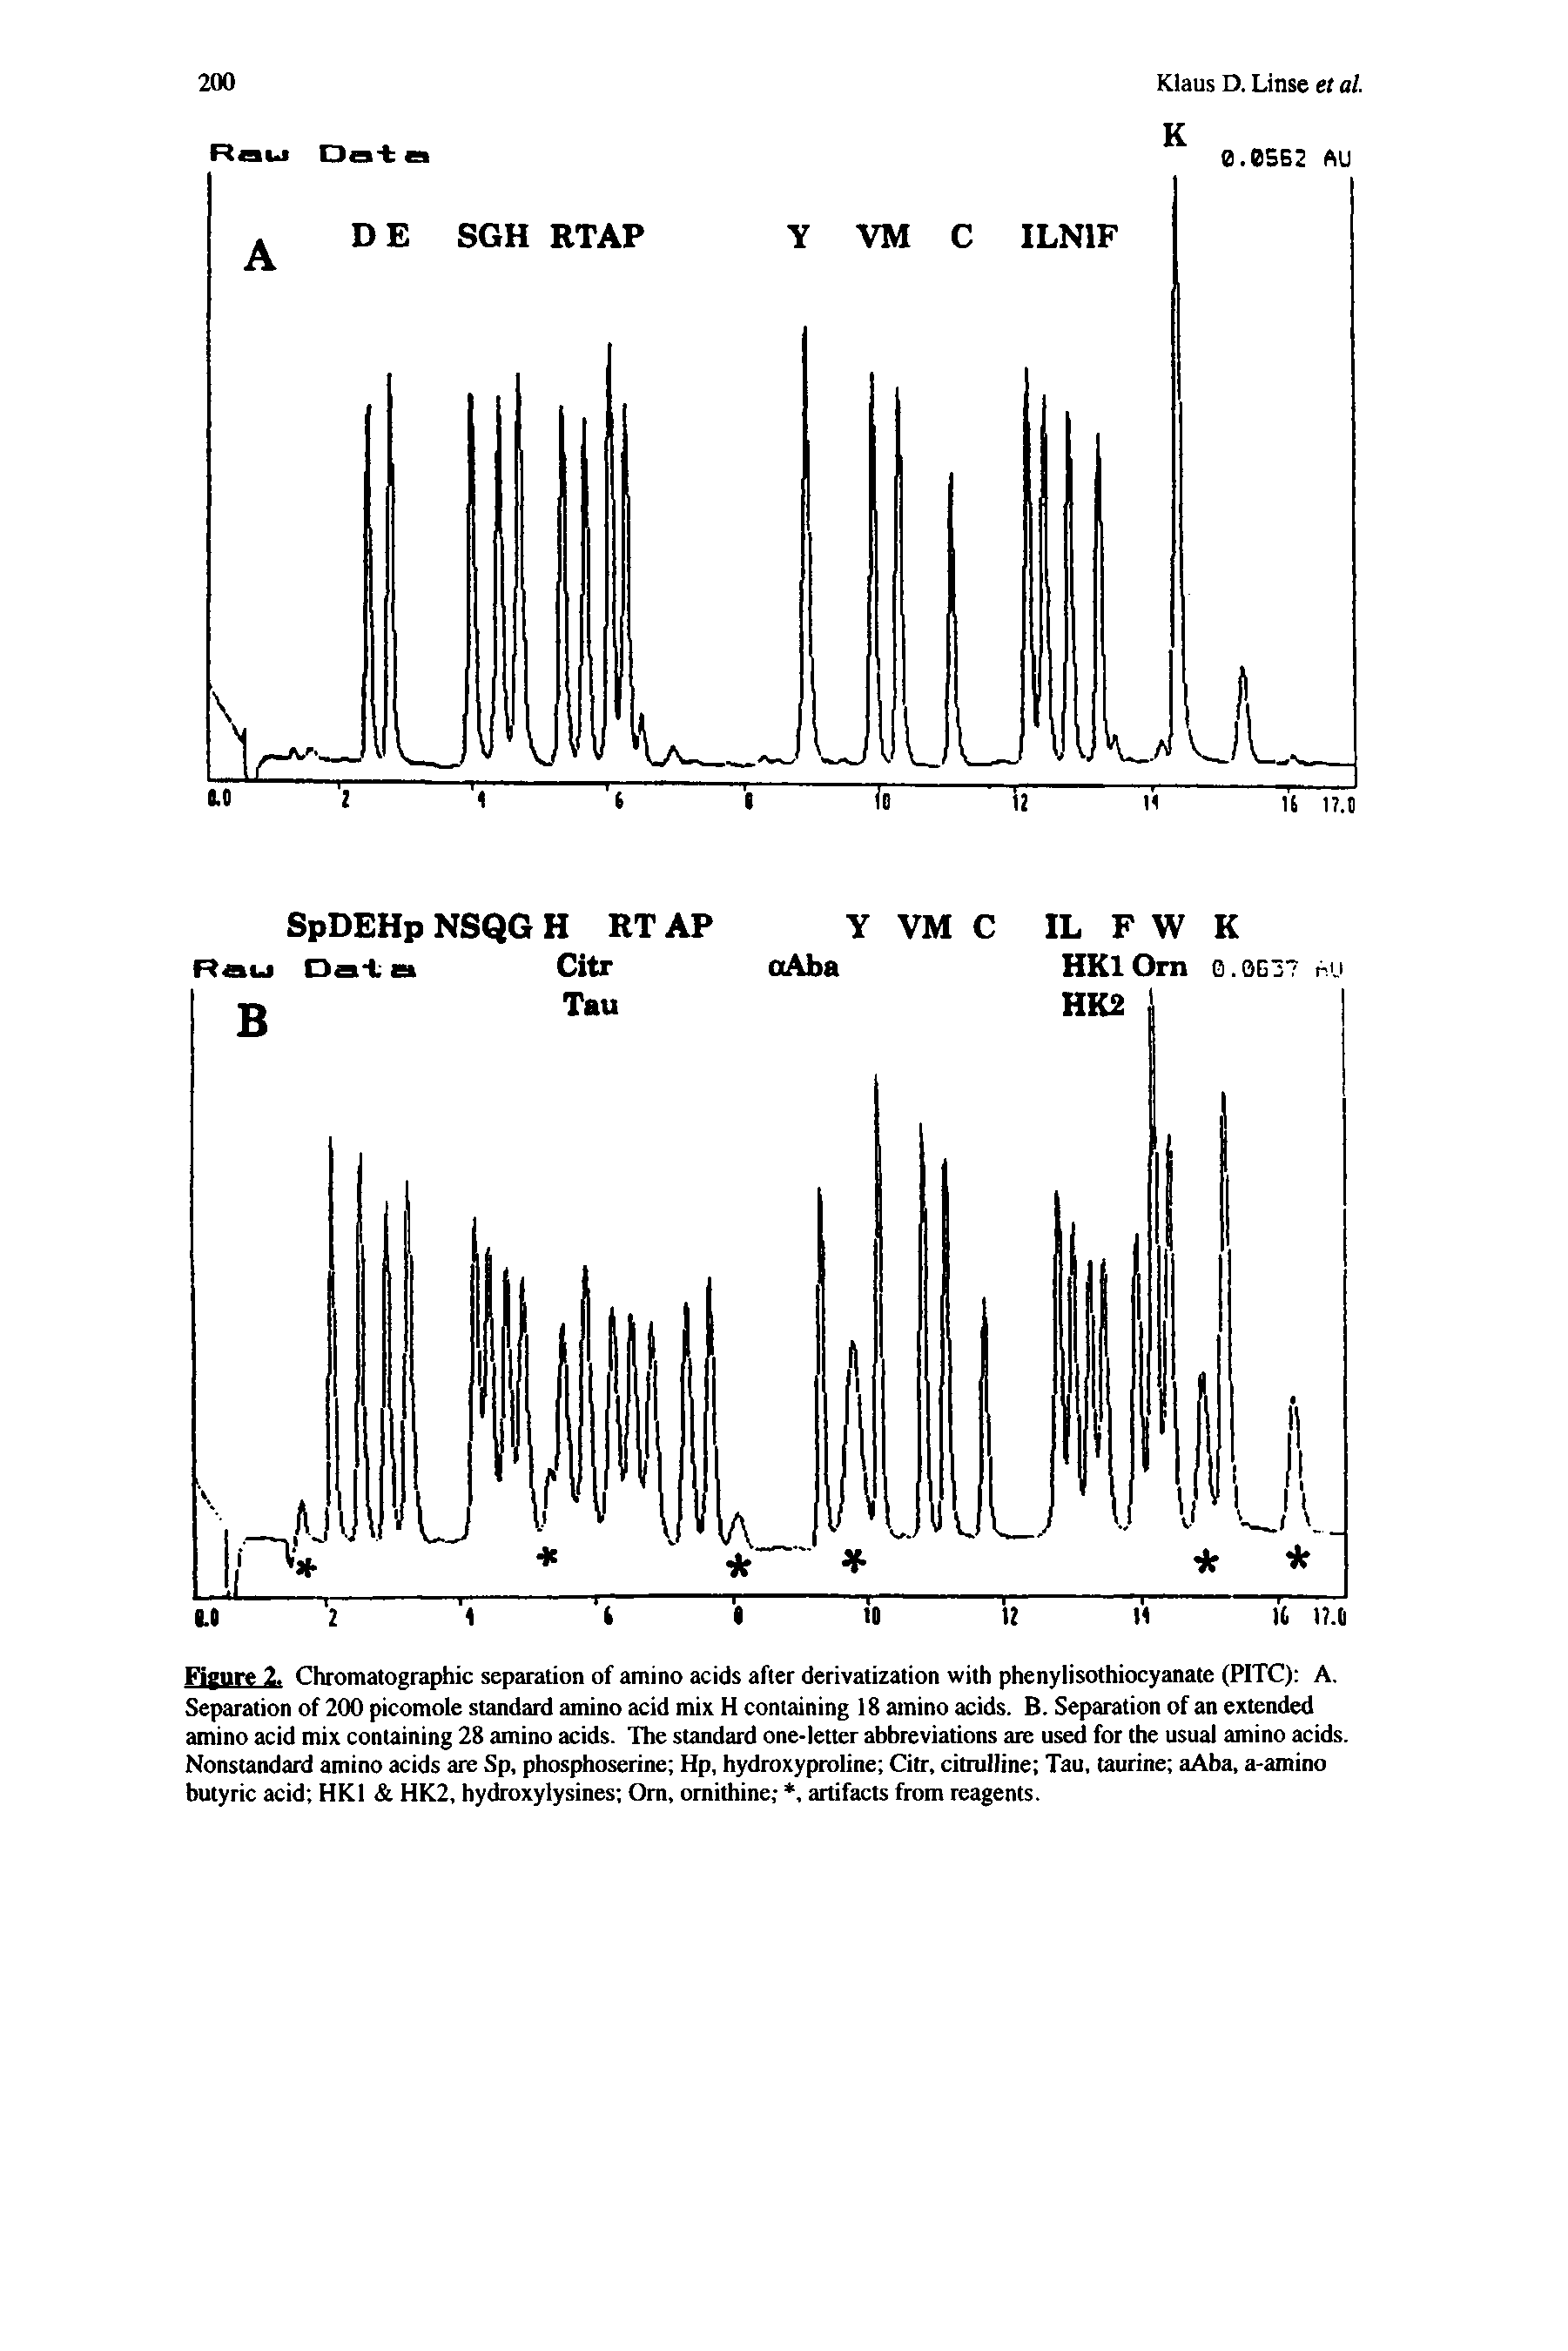 Figure 2. Chromatographic separation of amino acids after derivatization with phenylisothiocyanate (PITC) A. Separation of 200 picomole standard amino acid mix H containing 18 amino acids. B. Separation of an extended amino acid mix containing 28 amino acids. The standard one-letter abbreviations are used for the usual amino acids. Nonstandard amino acids are Sp, phosphoserine Hp, hydroxyproline Citr, citrulline Tau, taurine aAba, a-amino butyric acid HKl HK2, hyi oxylysines Om, ornithine , artifacts from reagents.